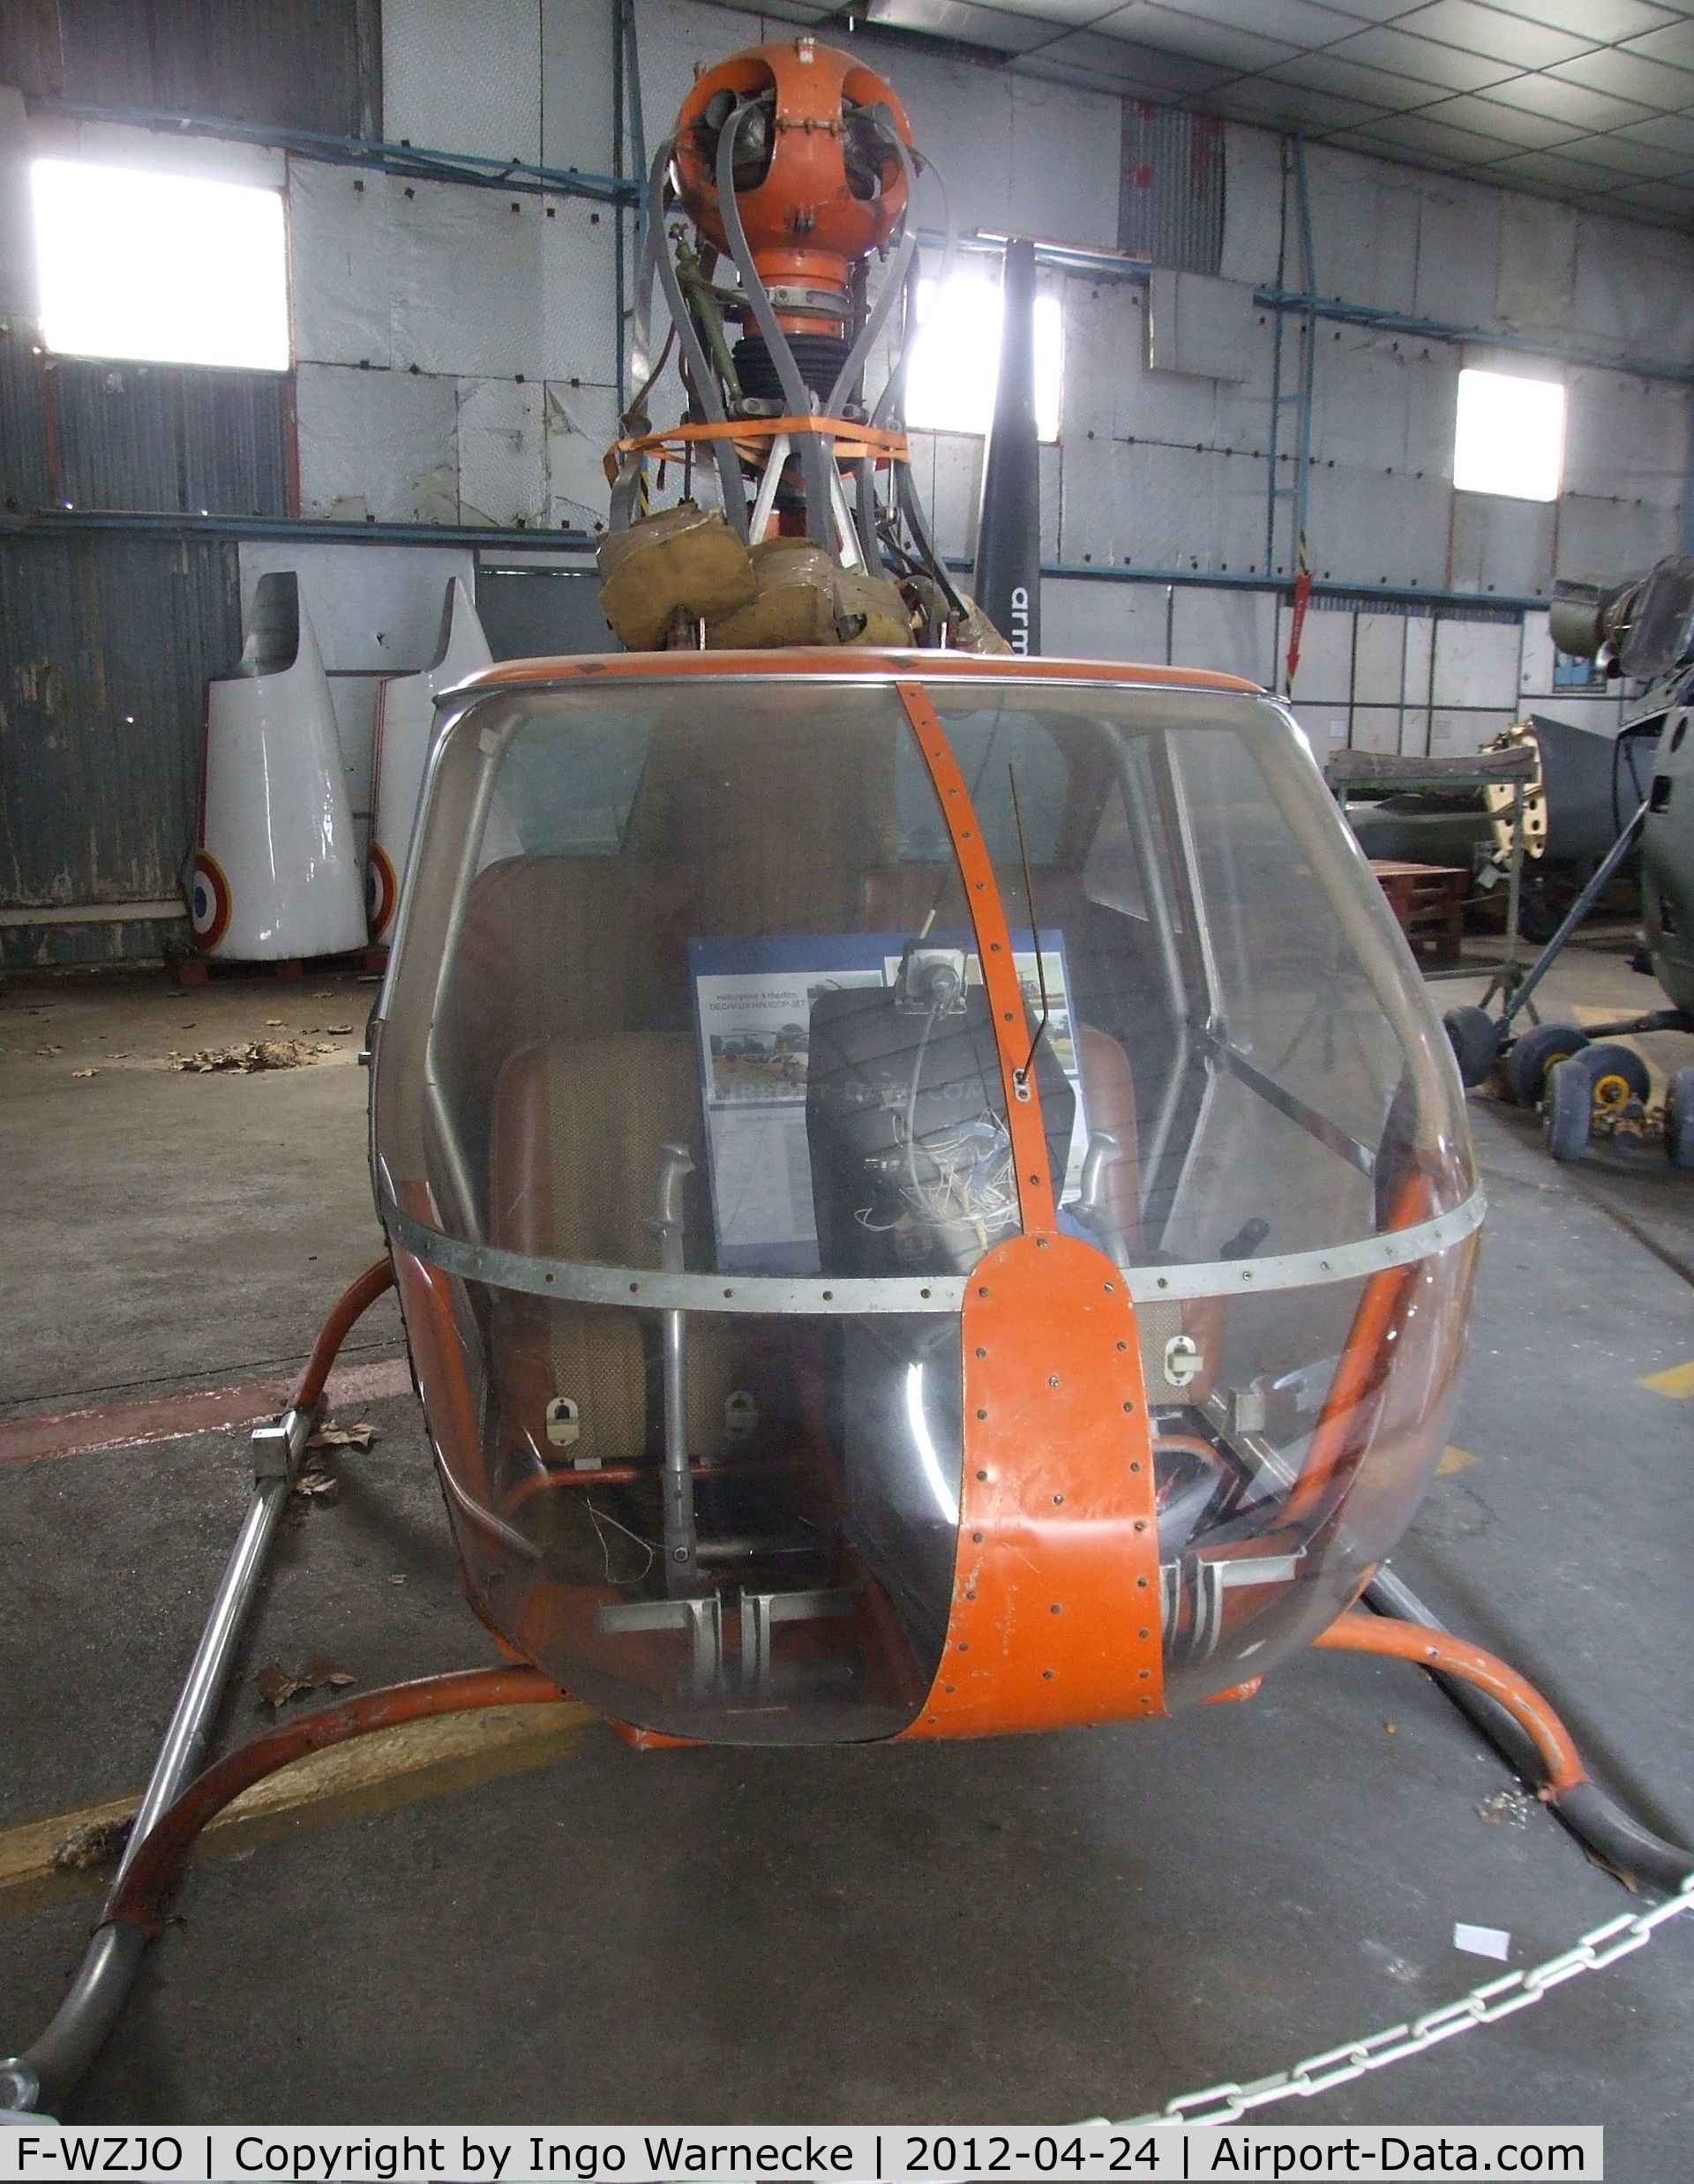 F-WZJO, 1984 Dechaux Helicop-jet C/N 02, Dechaux Helicop-Jet (minus rotor blades) being restored at the EALC Musee de l'Aviation Clement Ader, Lyon-Corbas